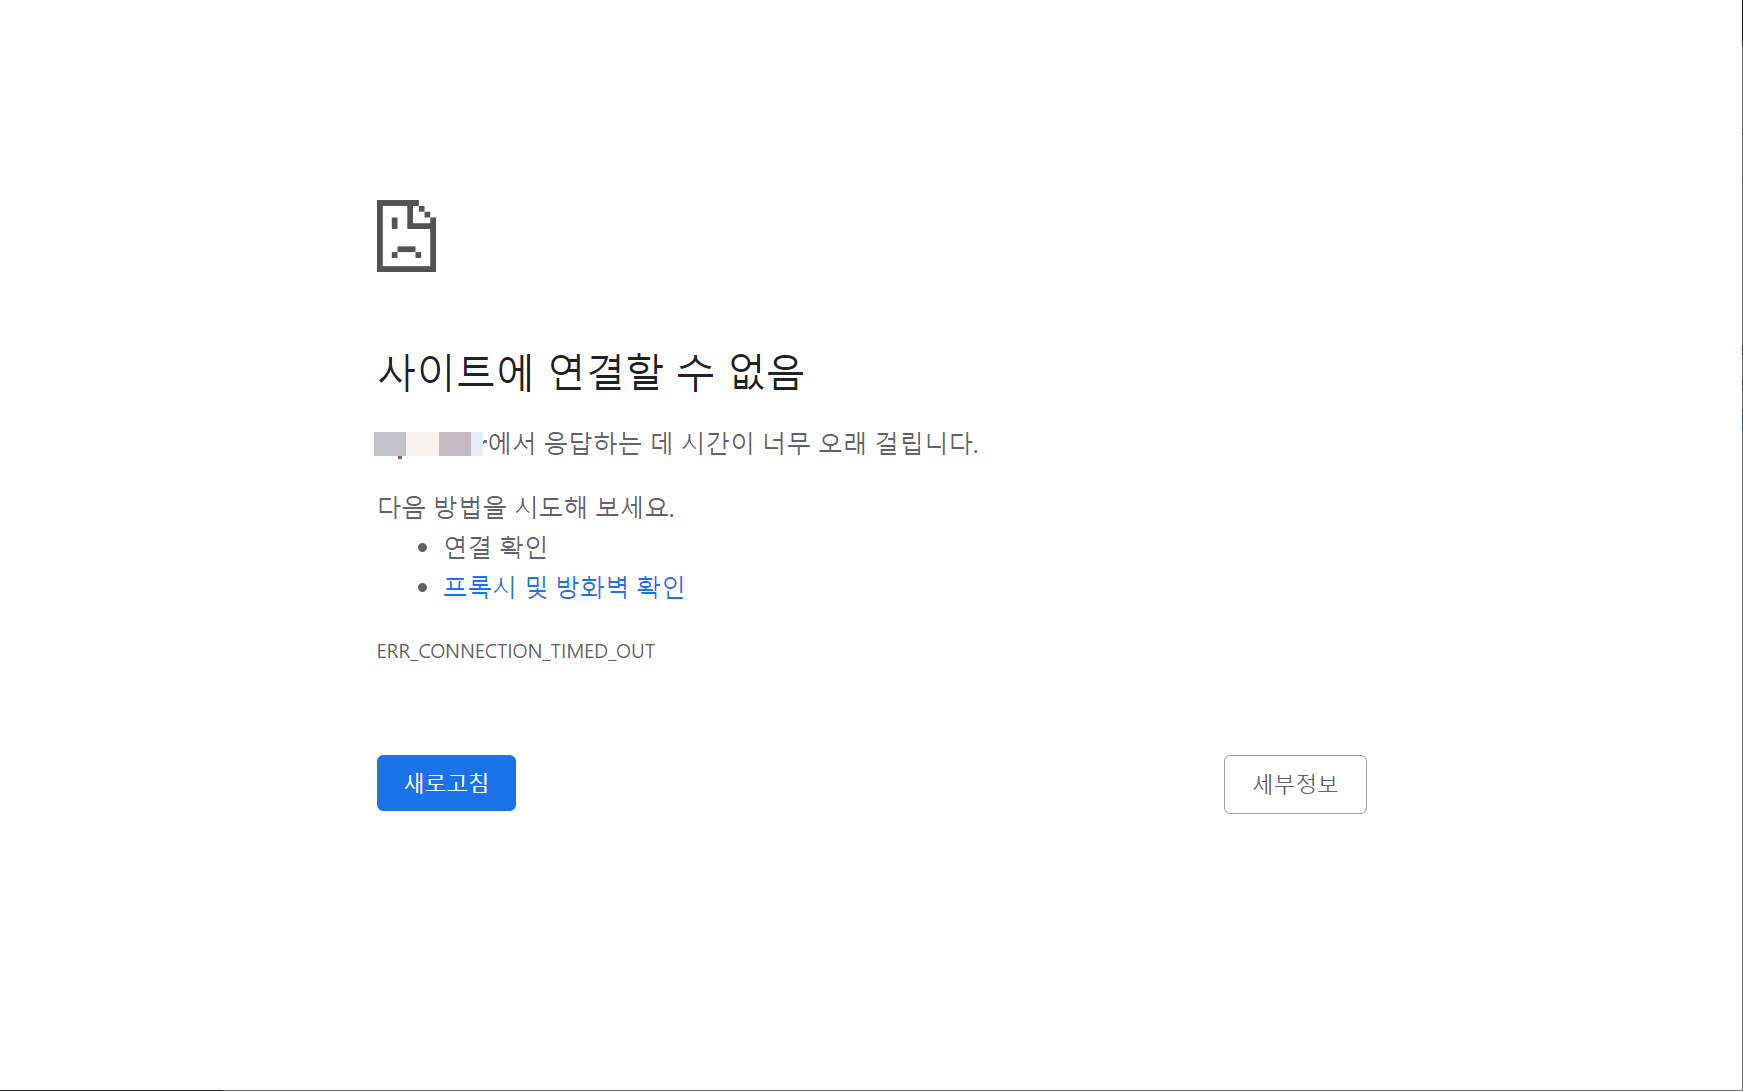 IP 주소 차단으로 인한 ERR_CONNECTION_TIMED_OUT 에러